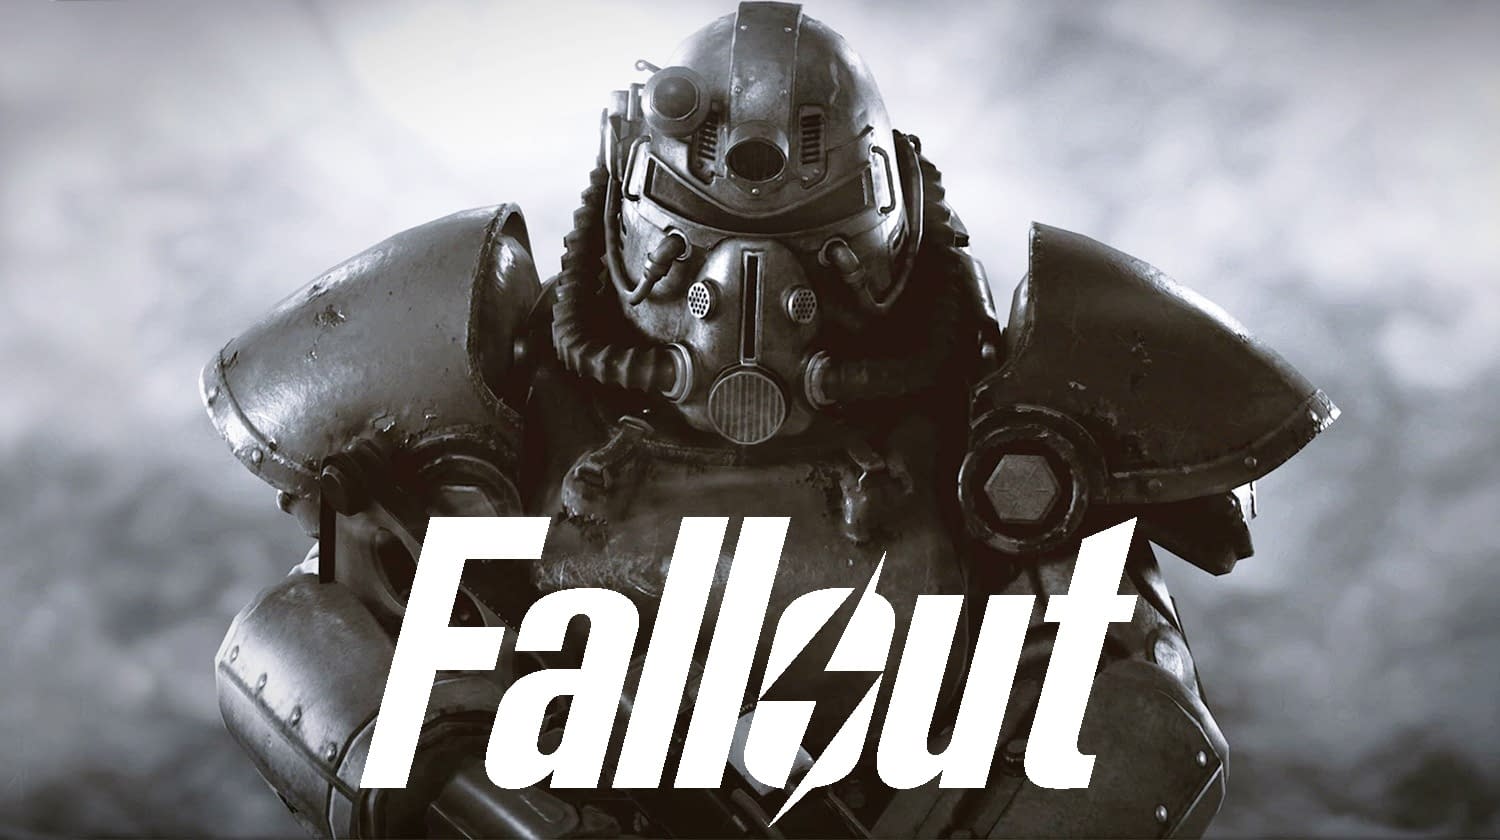 Amazon Releases First Image of Fallout Series